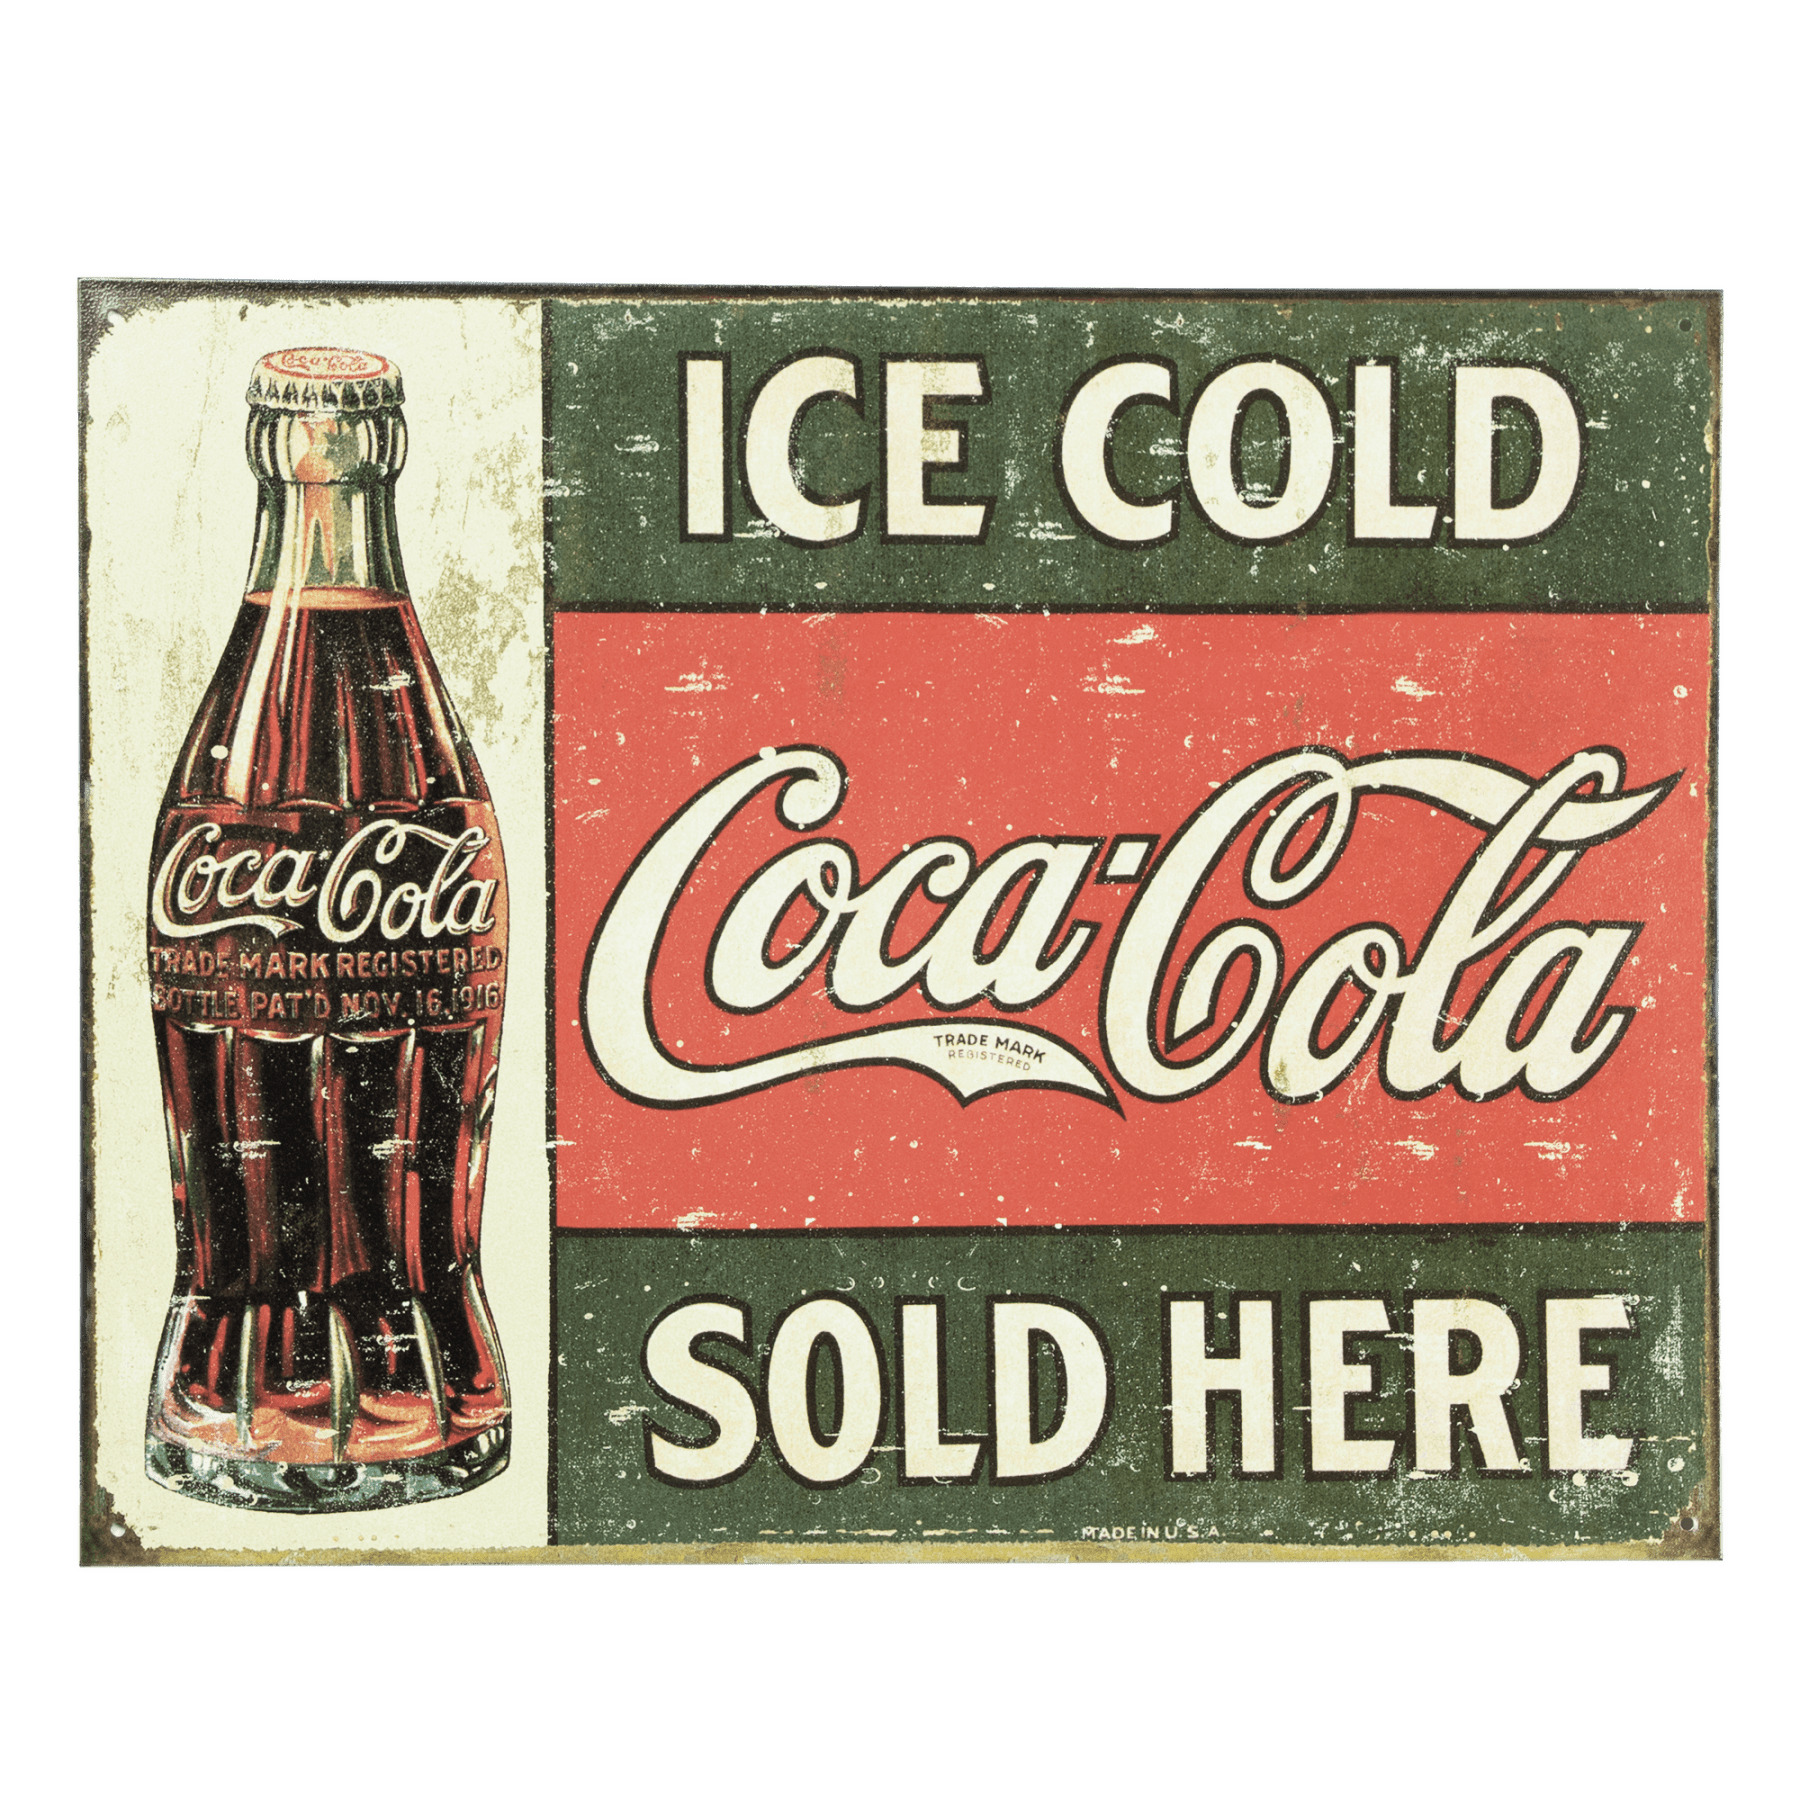 Coca Cola Sold Here Vintage Metal Sign icons